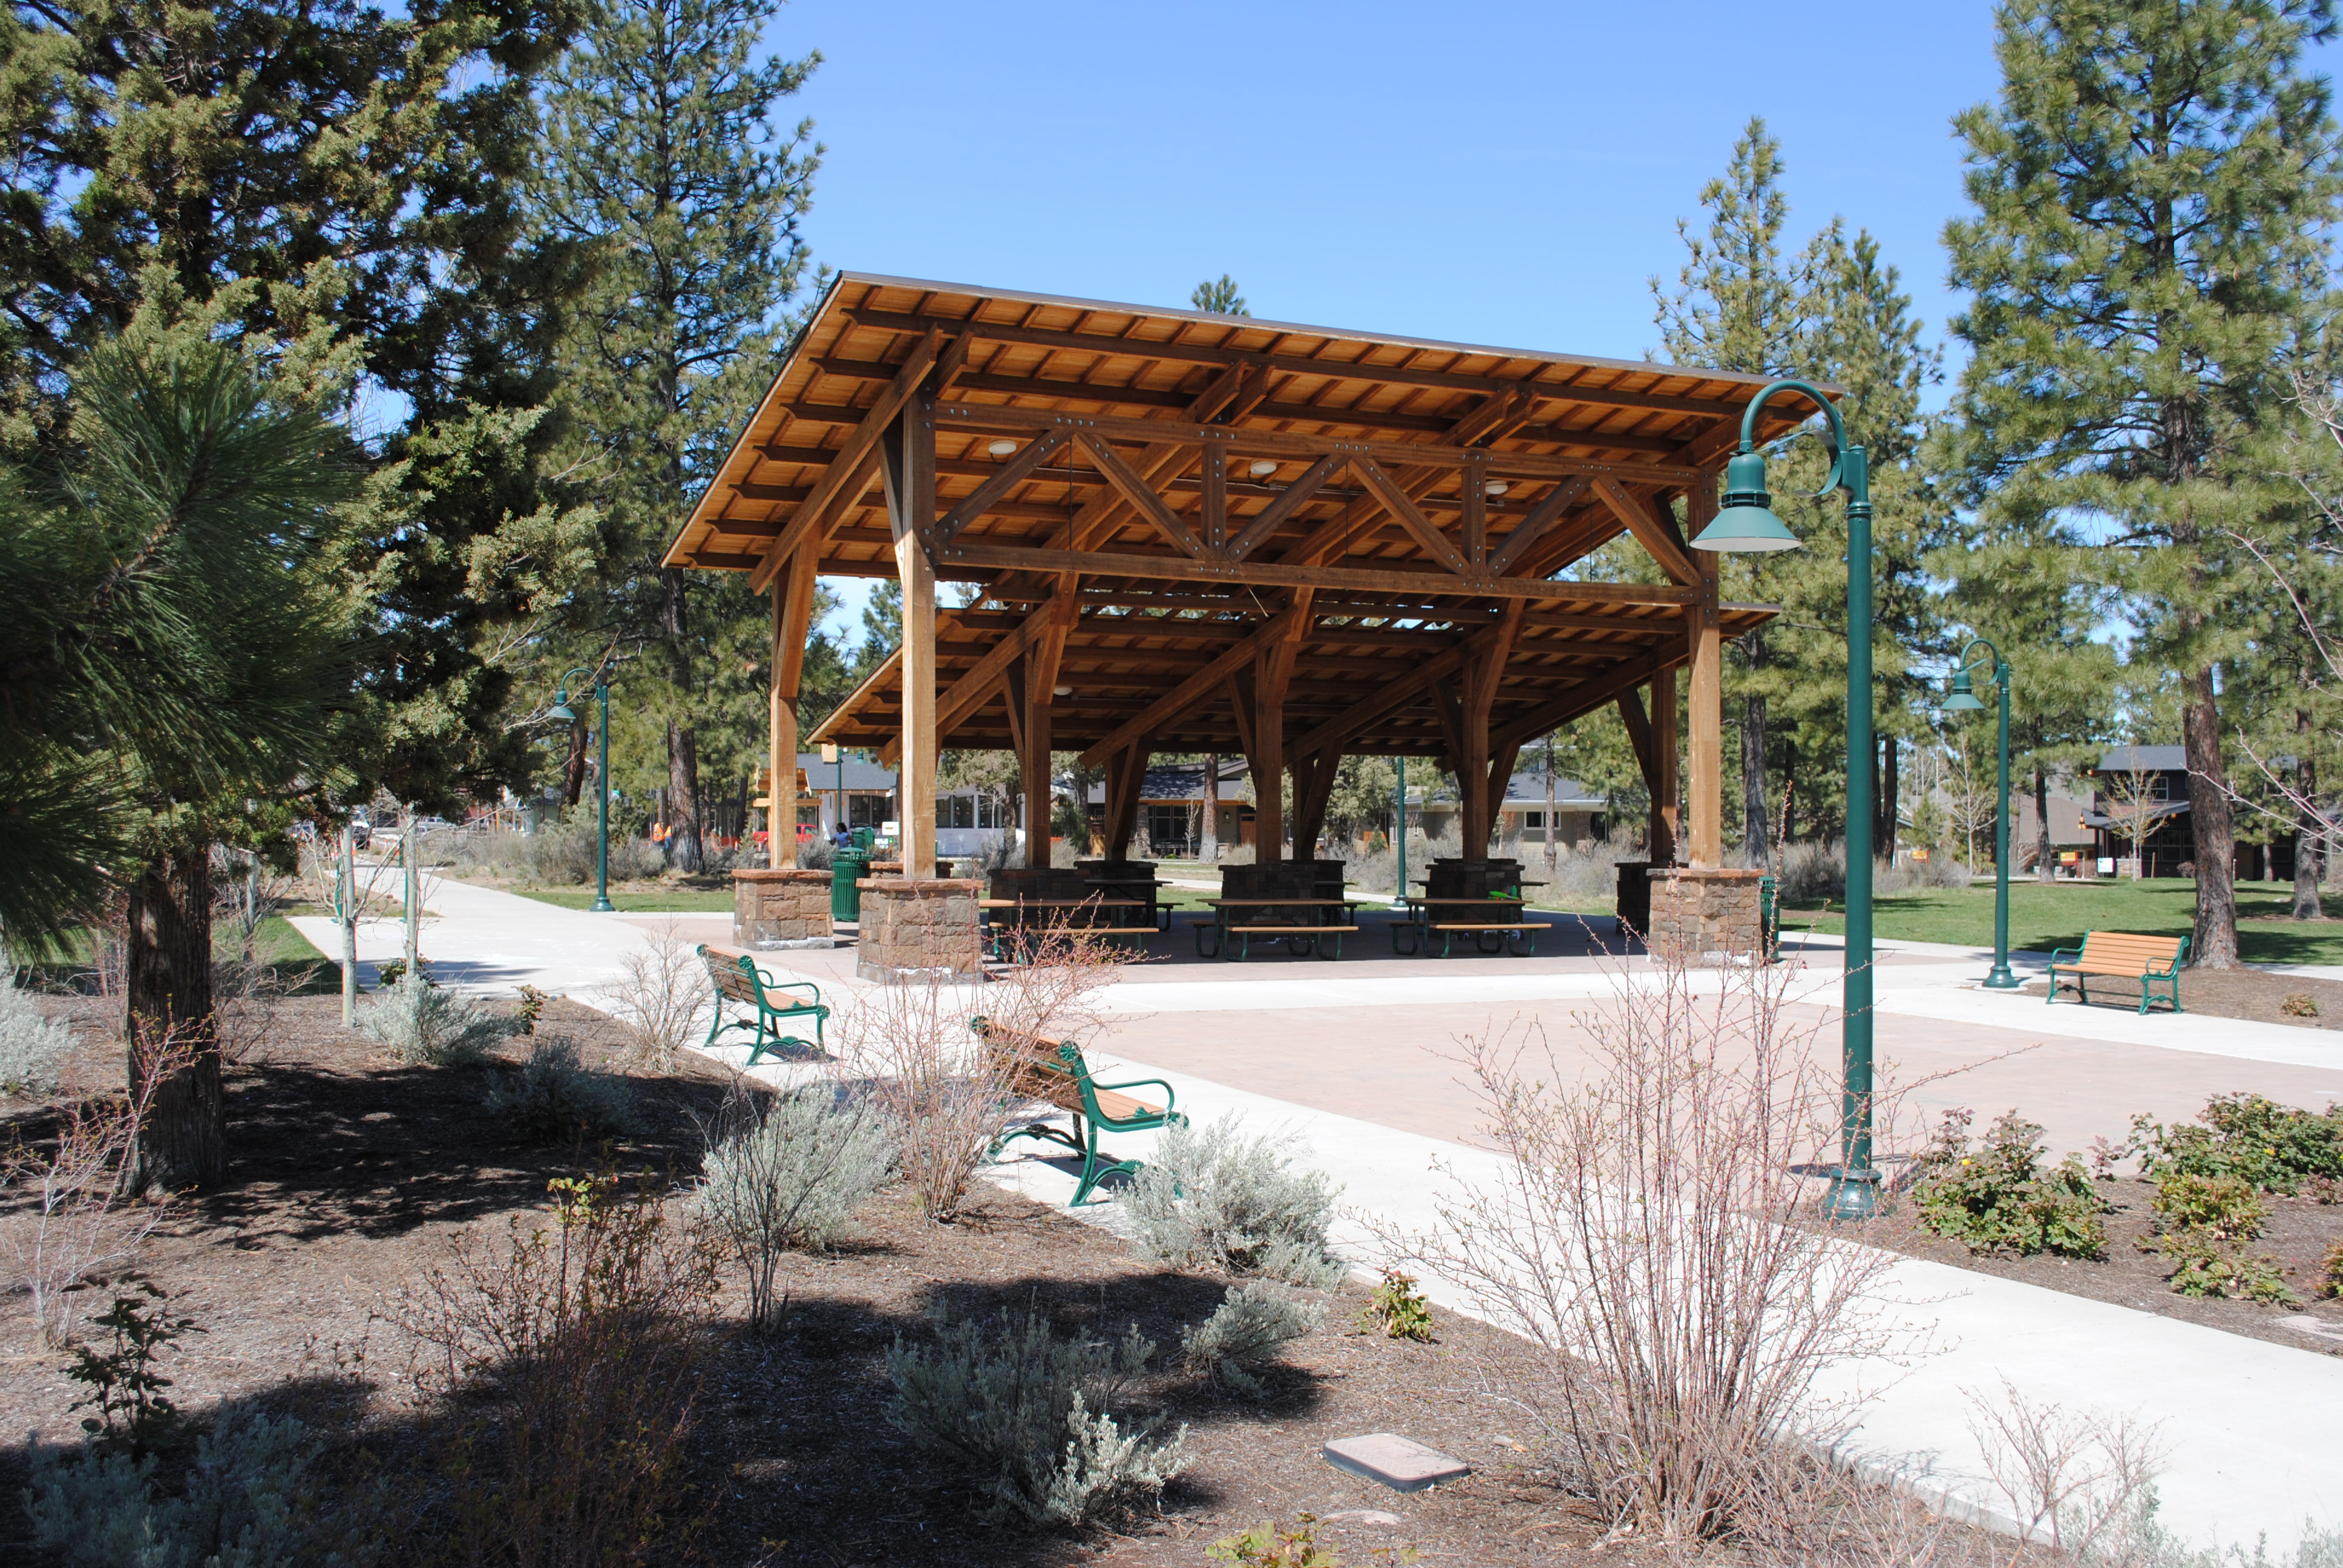 the picnic shelter at compass park